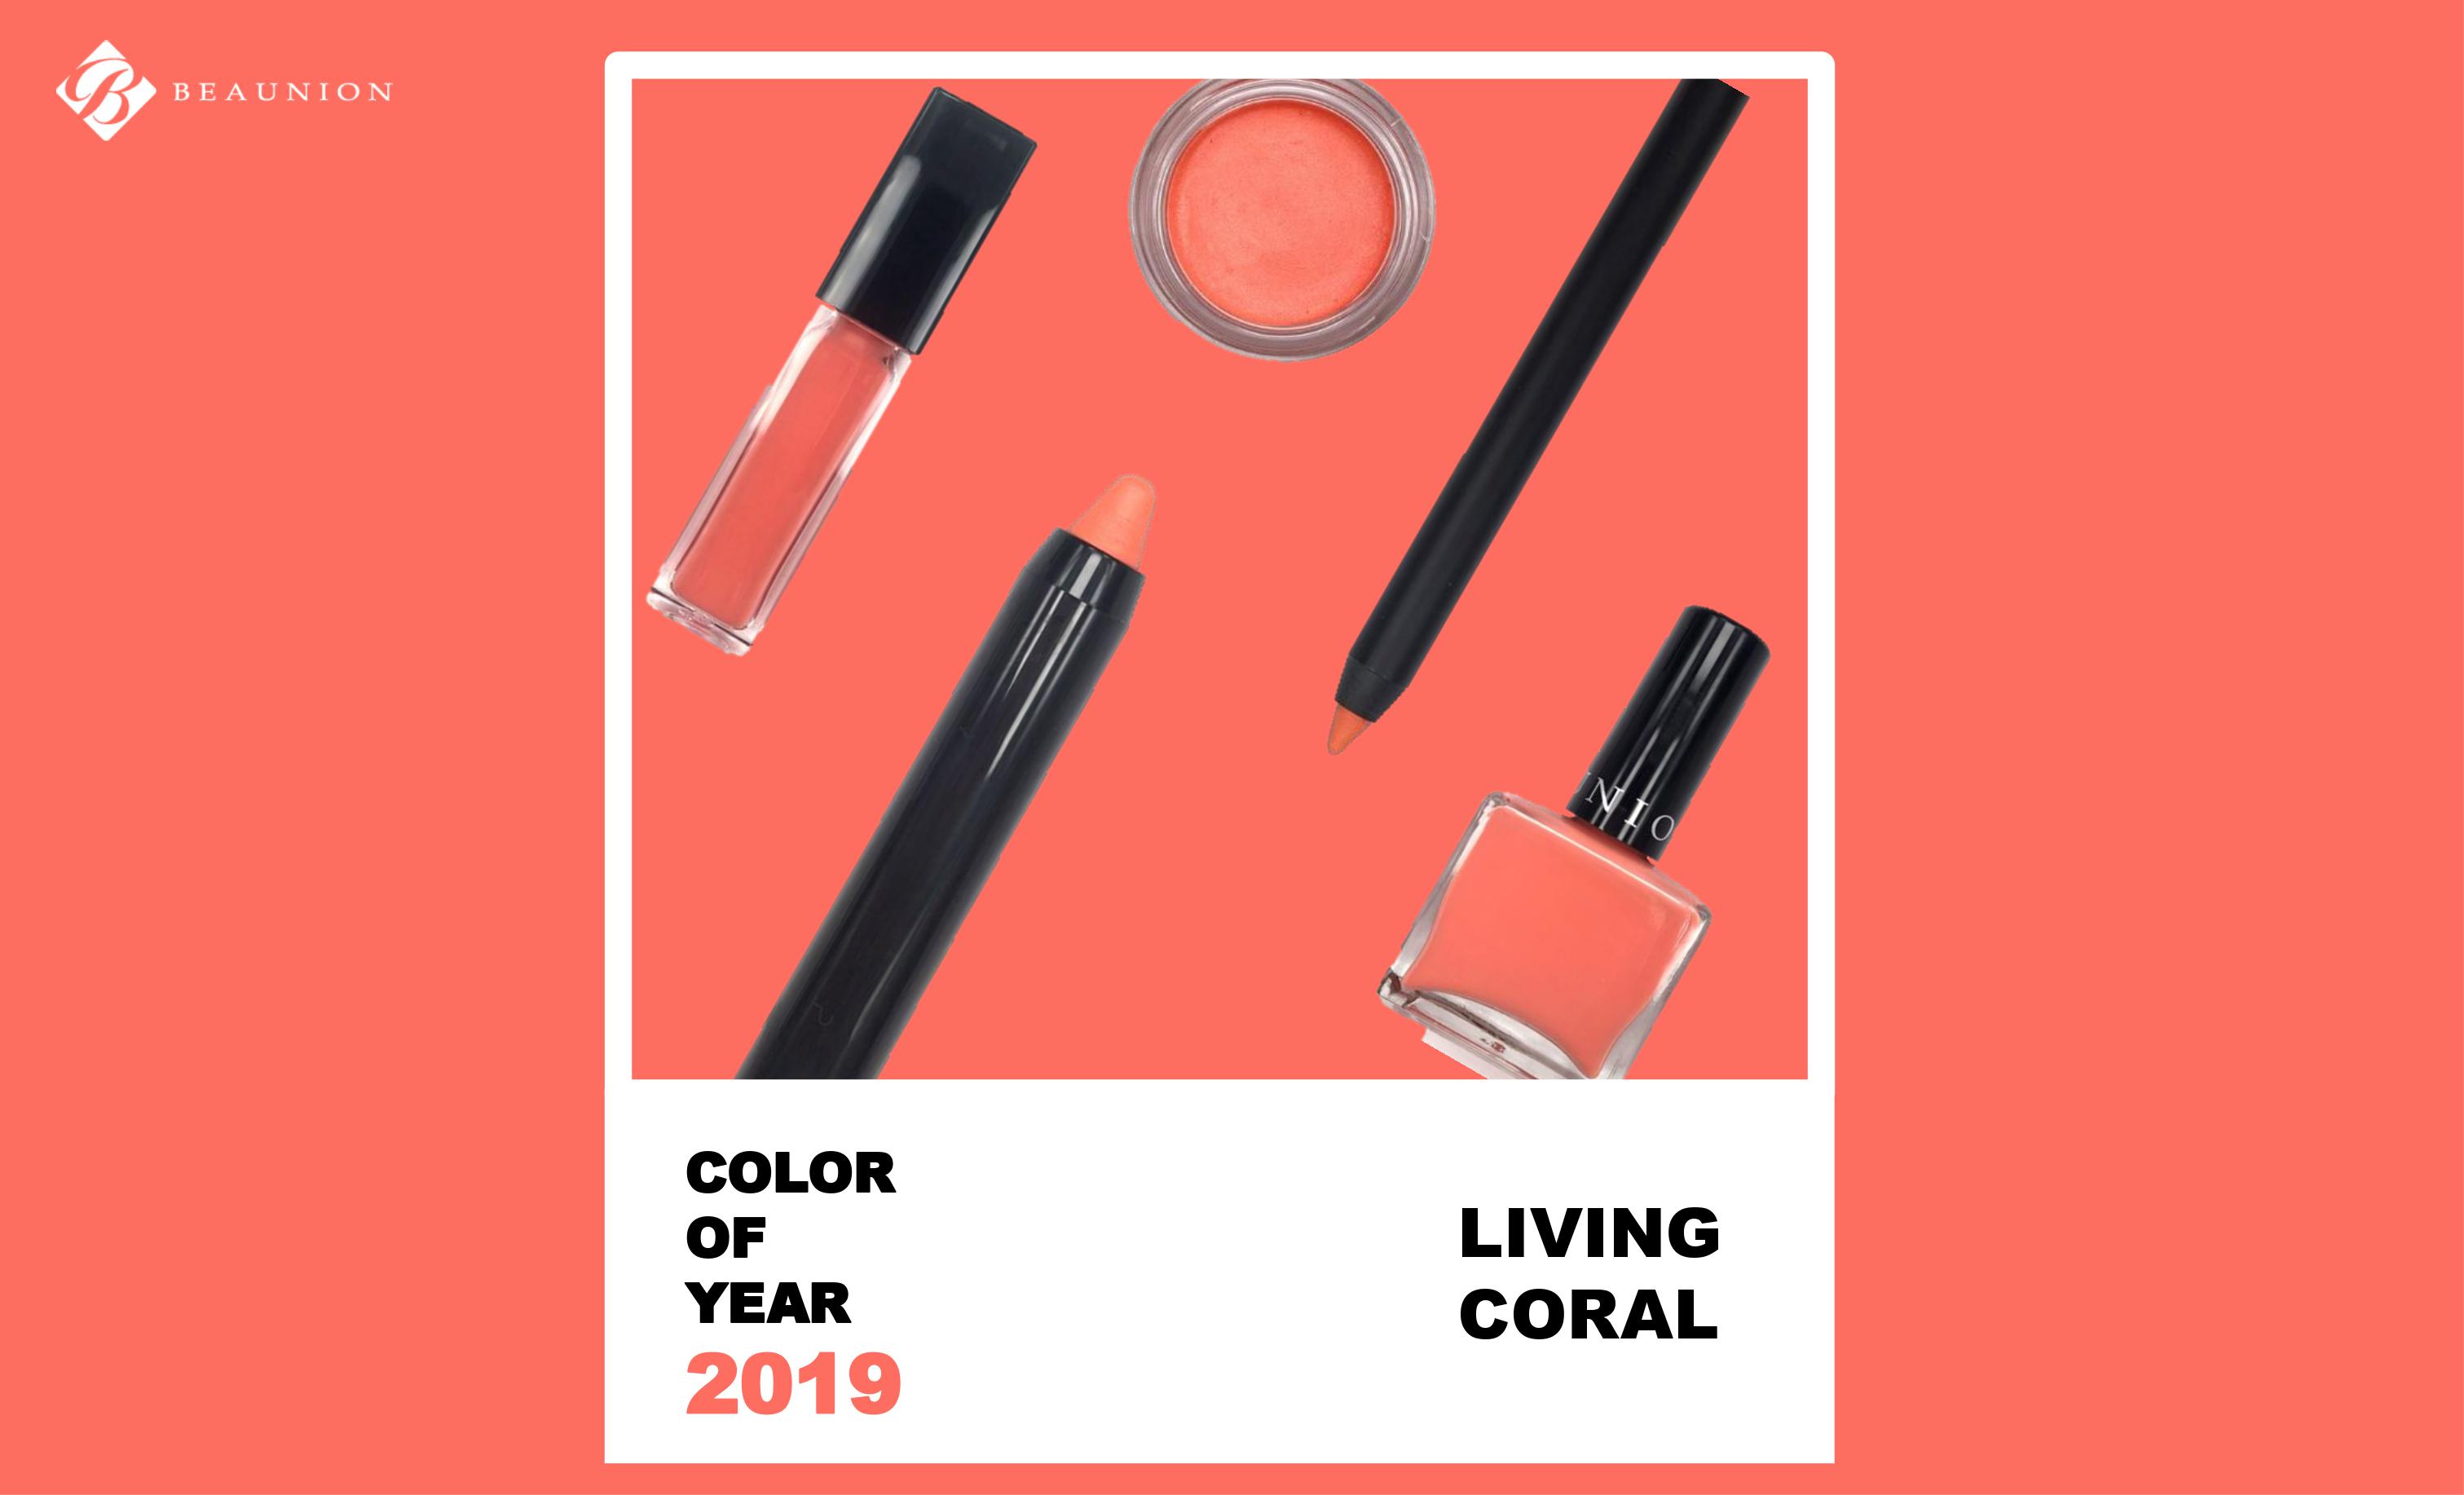 【Beaunion】2019 LIVING CORAL